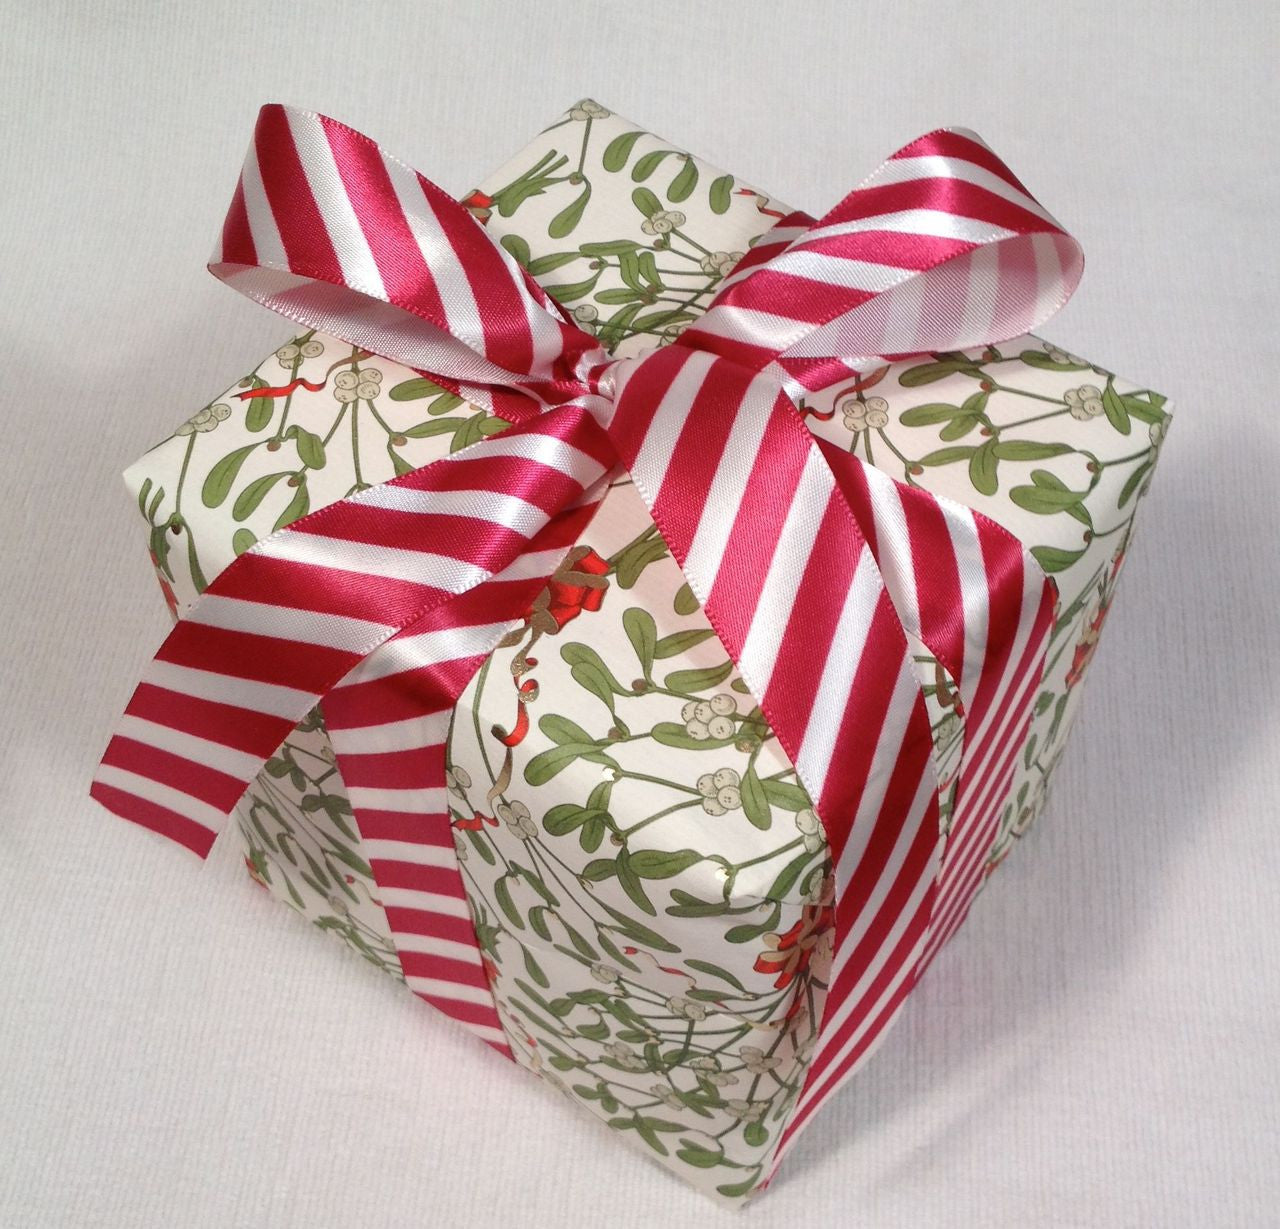 A pretty little gift all tied up in a stripped bow!!